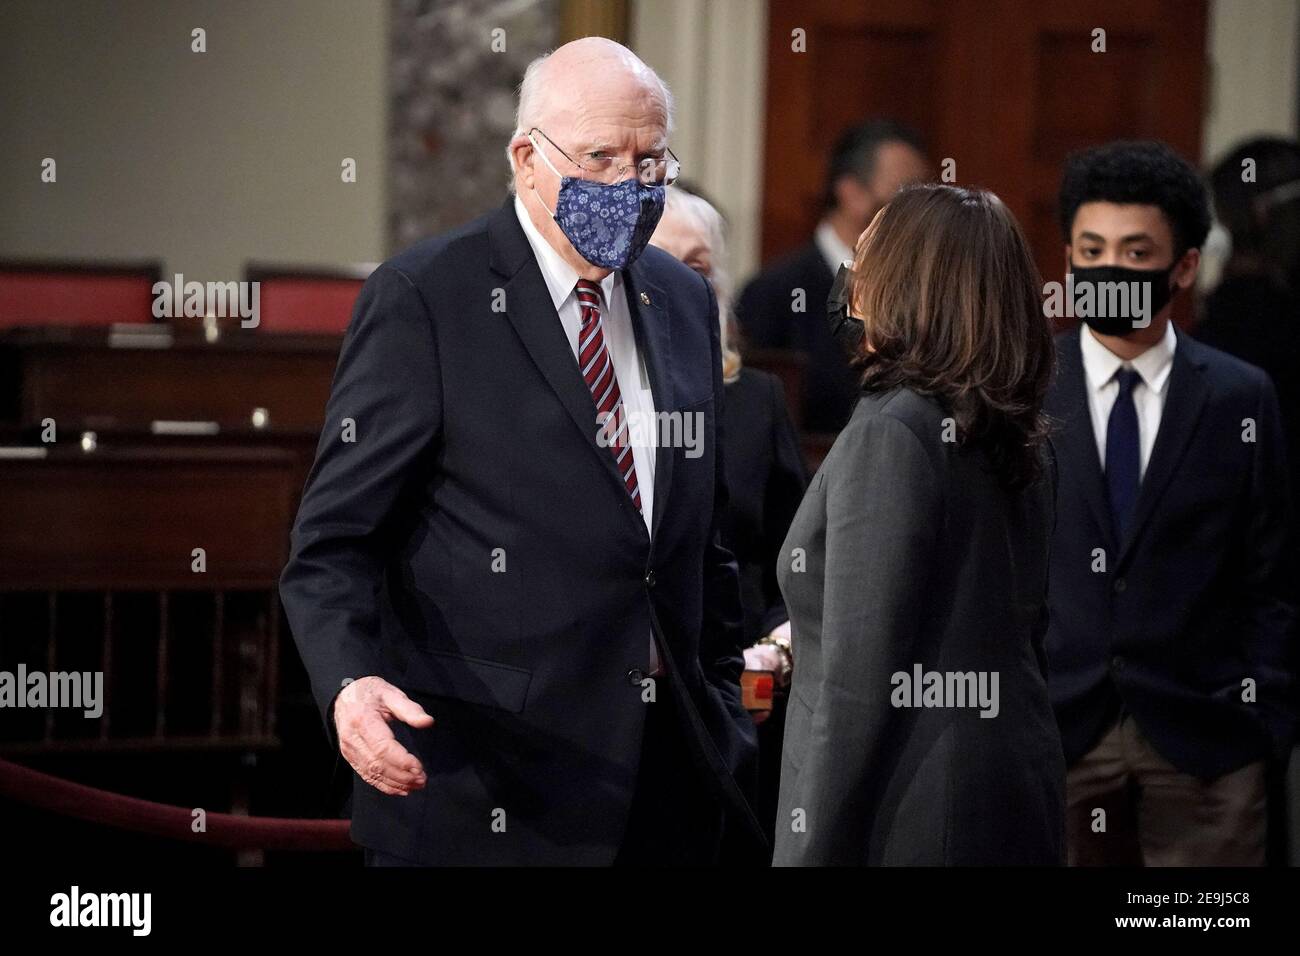 Sen. Patrick Leahy (D-Vt.) speaks to Vice President Kamala Harris before a ceremonial swearing in photo op on Thursday, February 4, 2021 in the Old Senate Chamber at the U.S. Capitol in Washington, DC.Credit: Greg Nash/Pool via CNP | usage worldwide Stock Photo